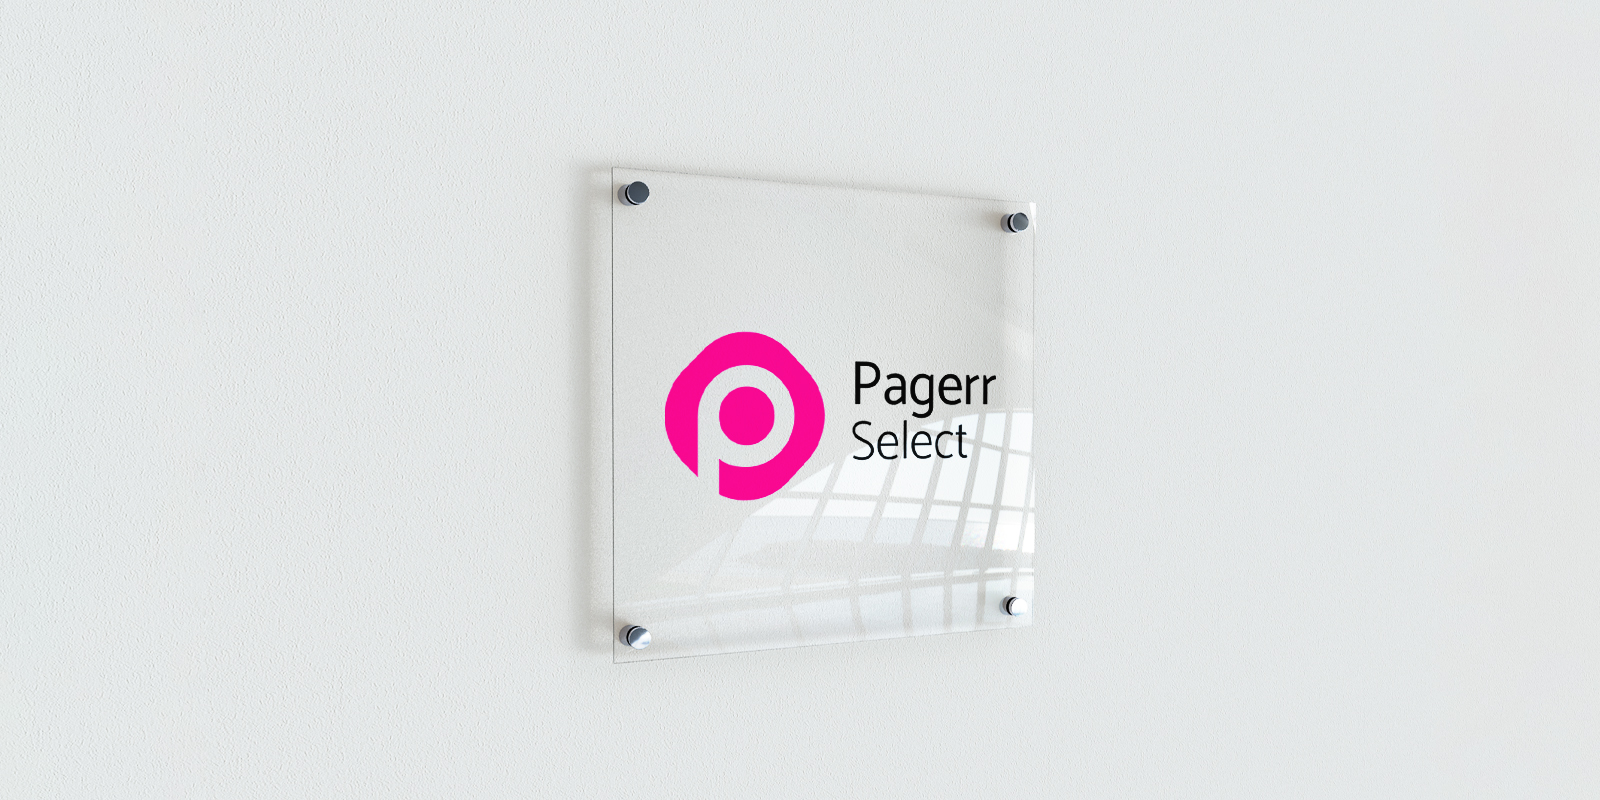 Acrylic signs in Hamburg - Print with Pagerr